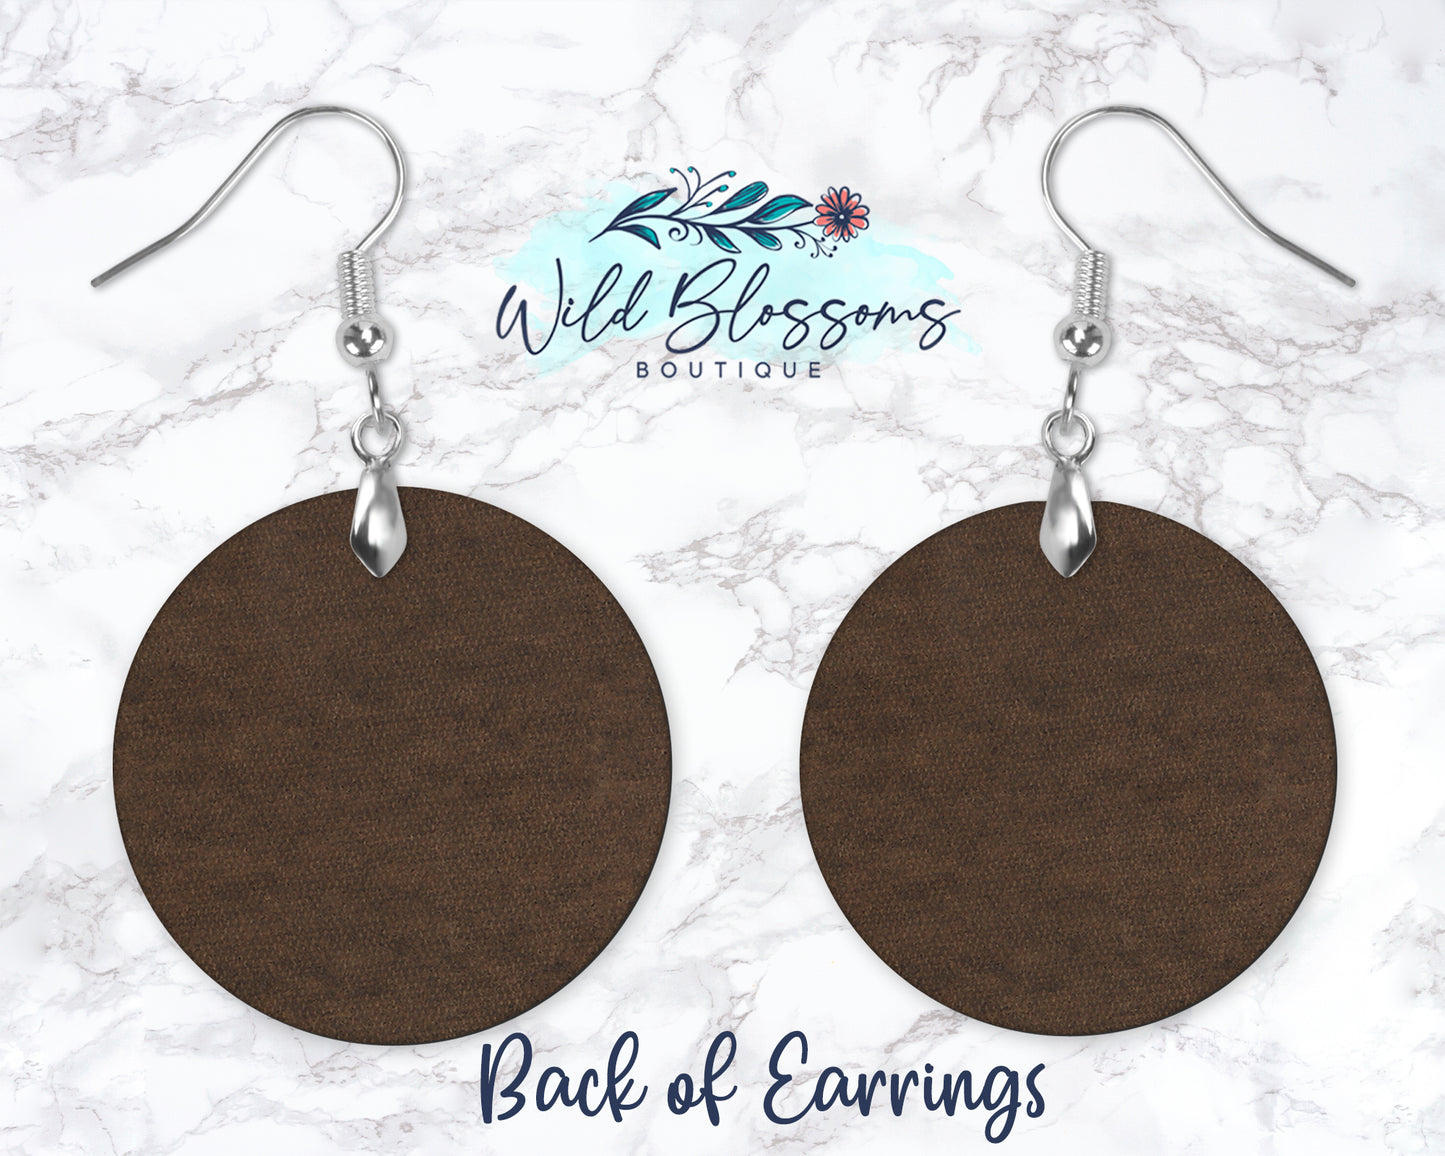 Wooden And Buffalo Plaid Round Drop Earrings